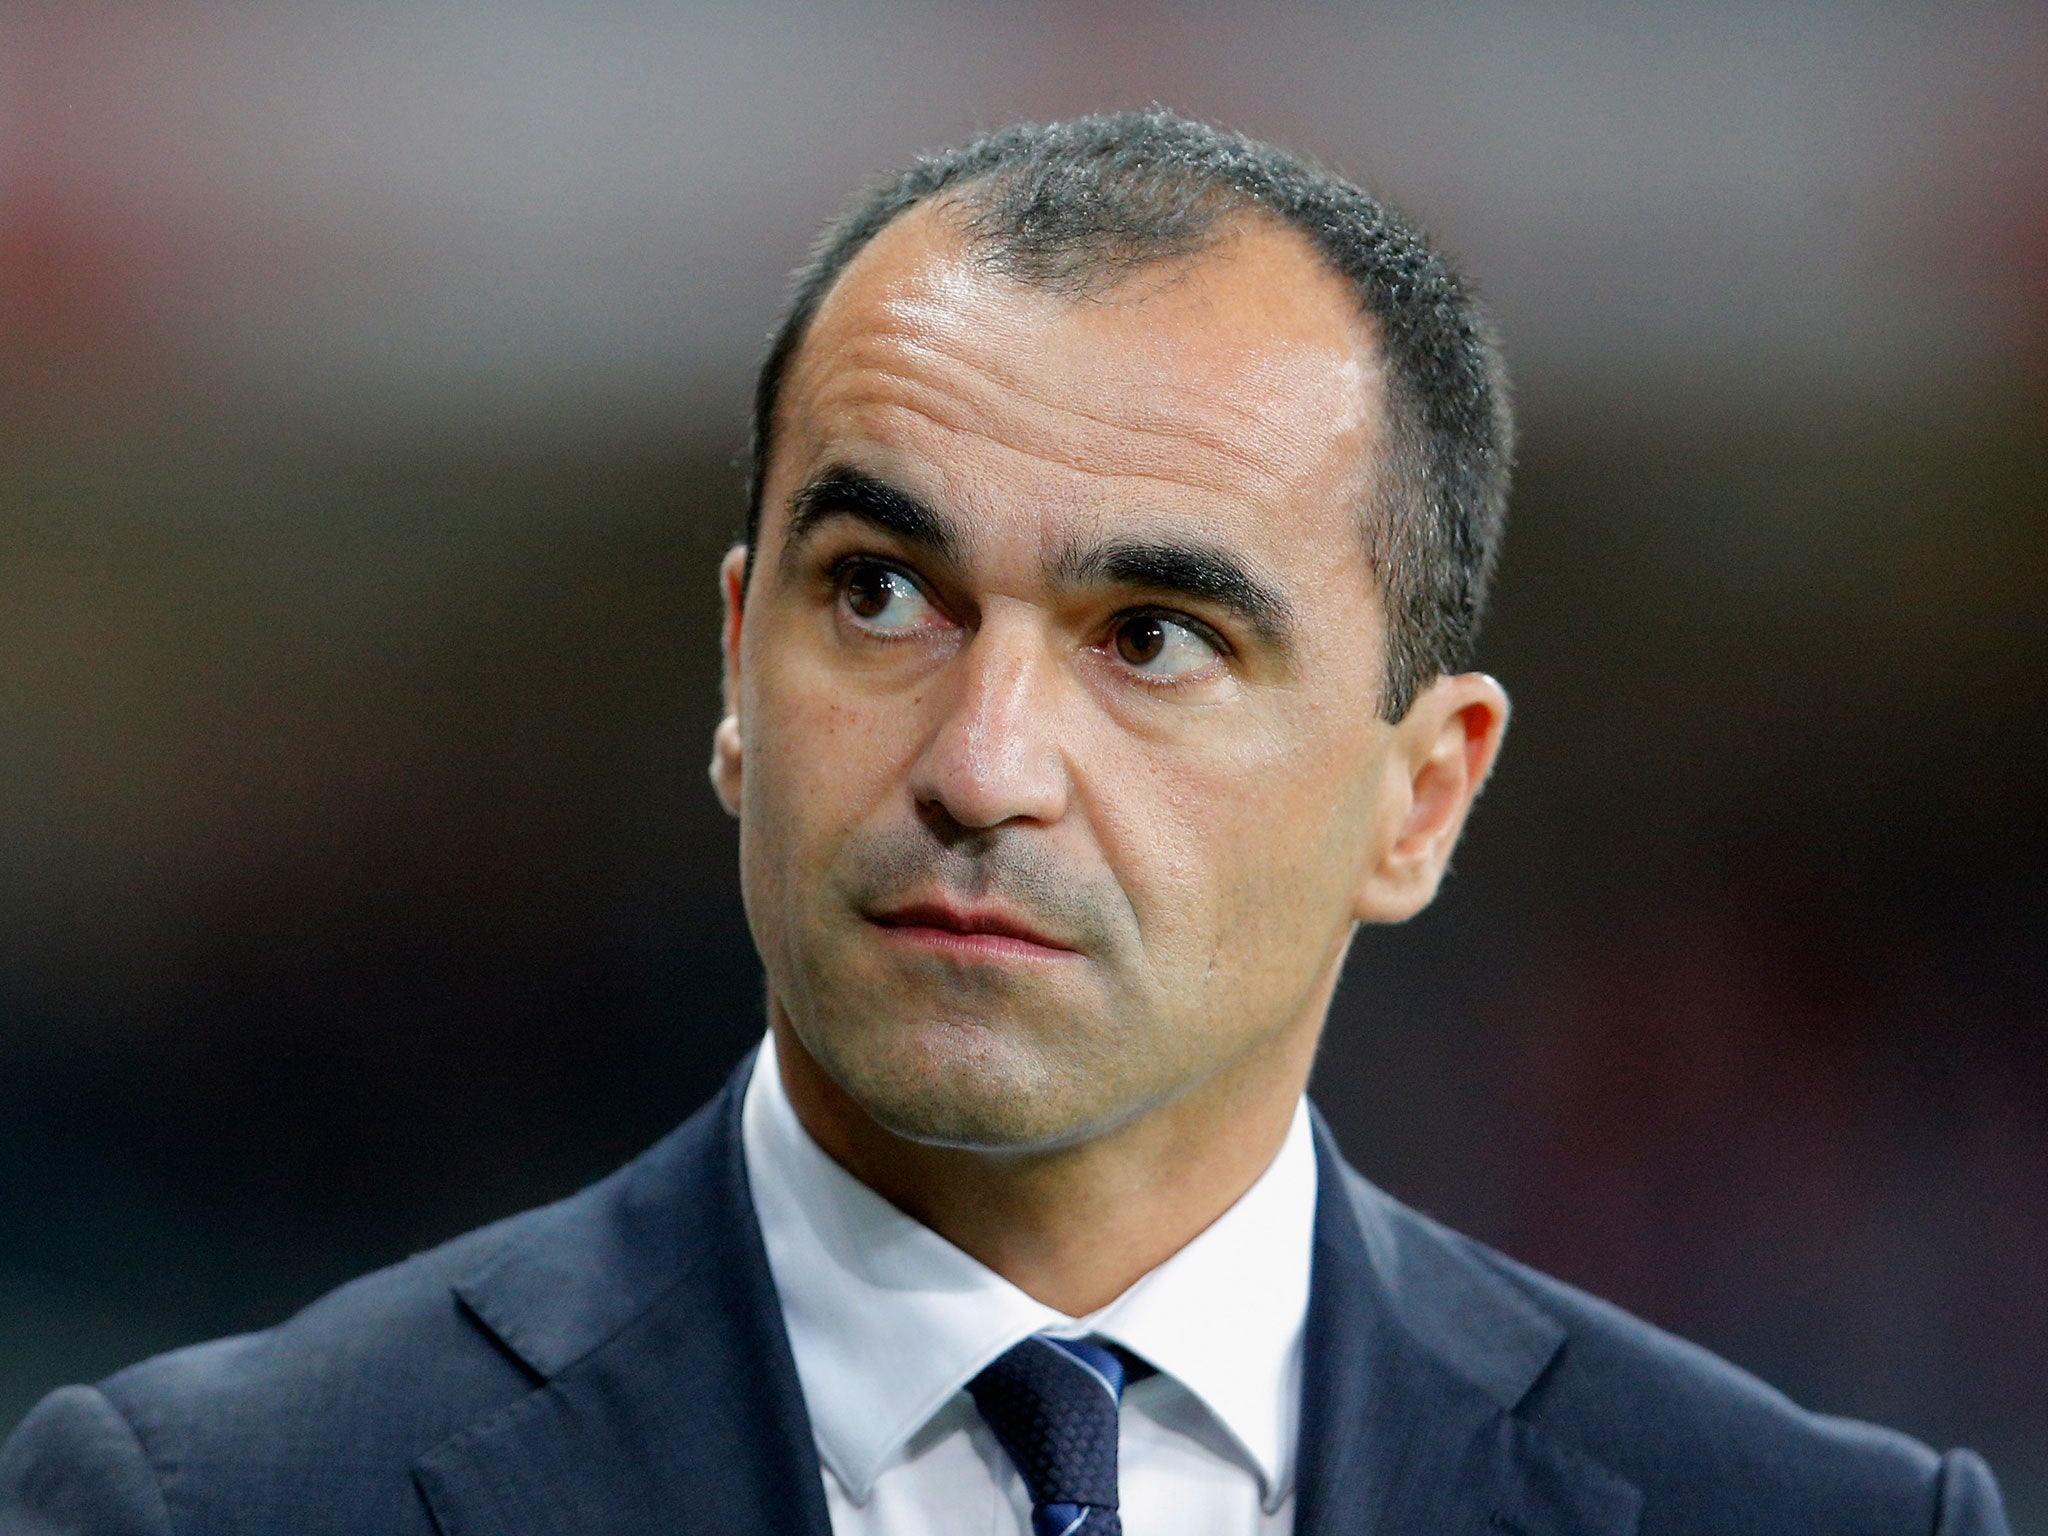 Roberto Martinez has been pleased with Everton's upturn in results